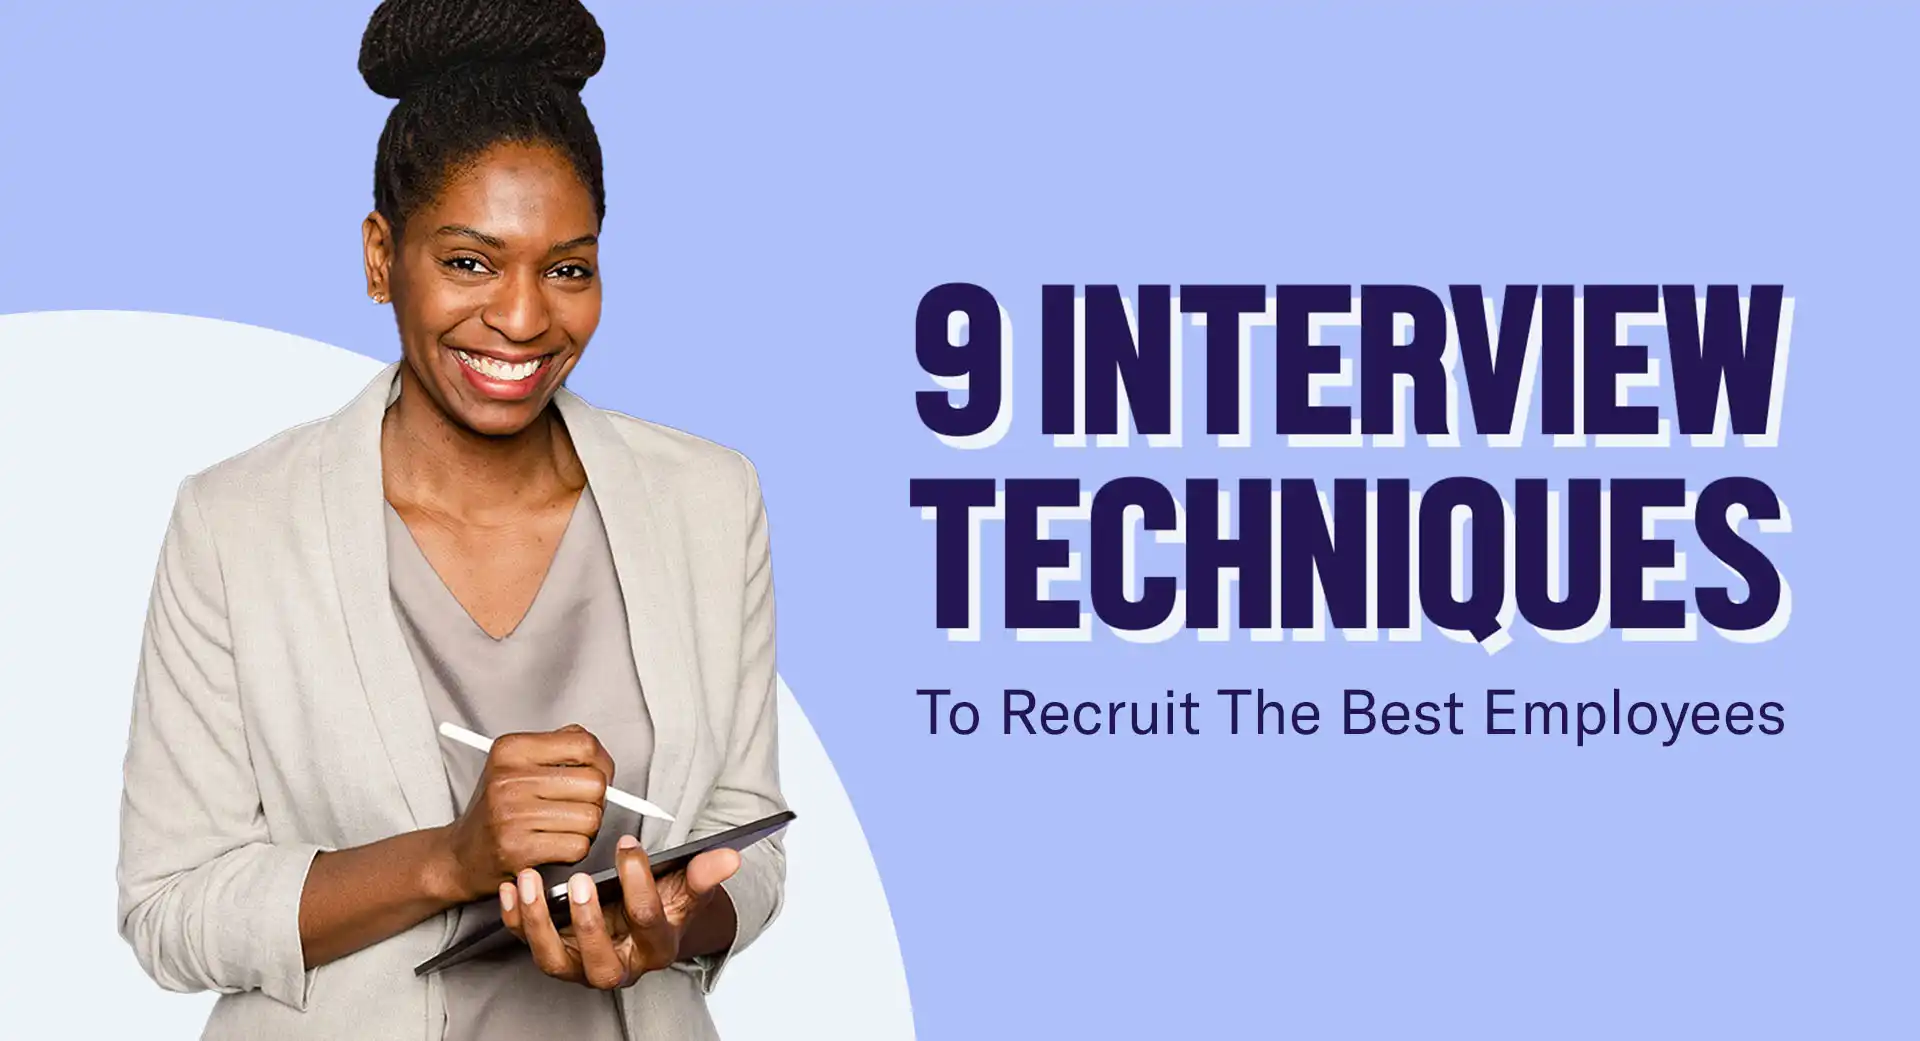 9 Interview Techniques to Recruit the Best Employees